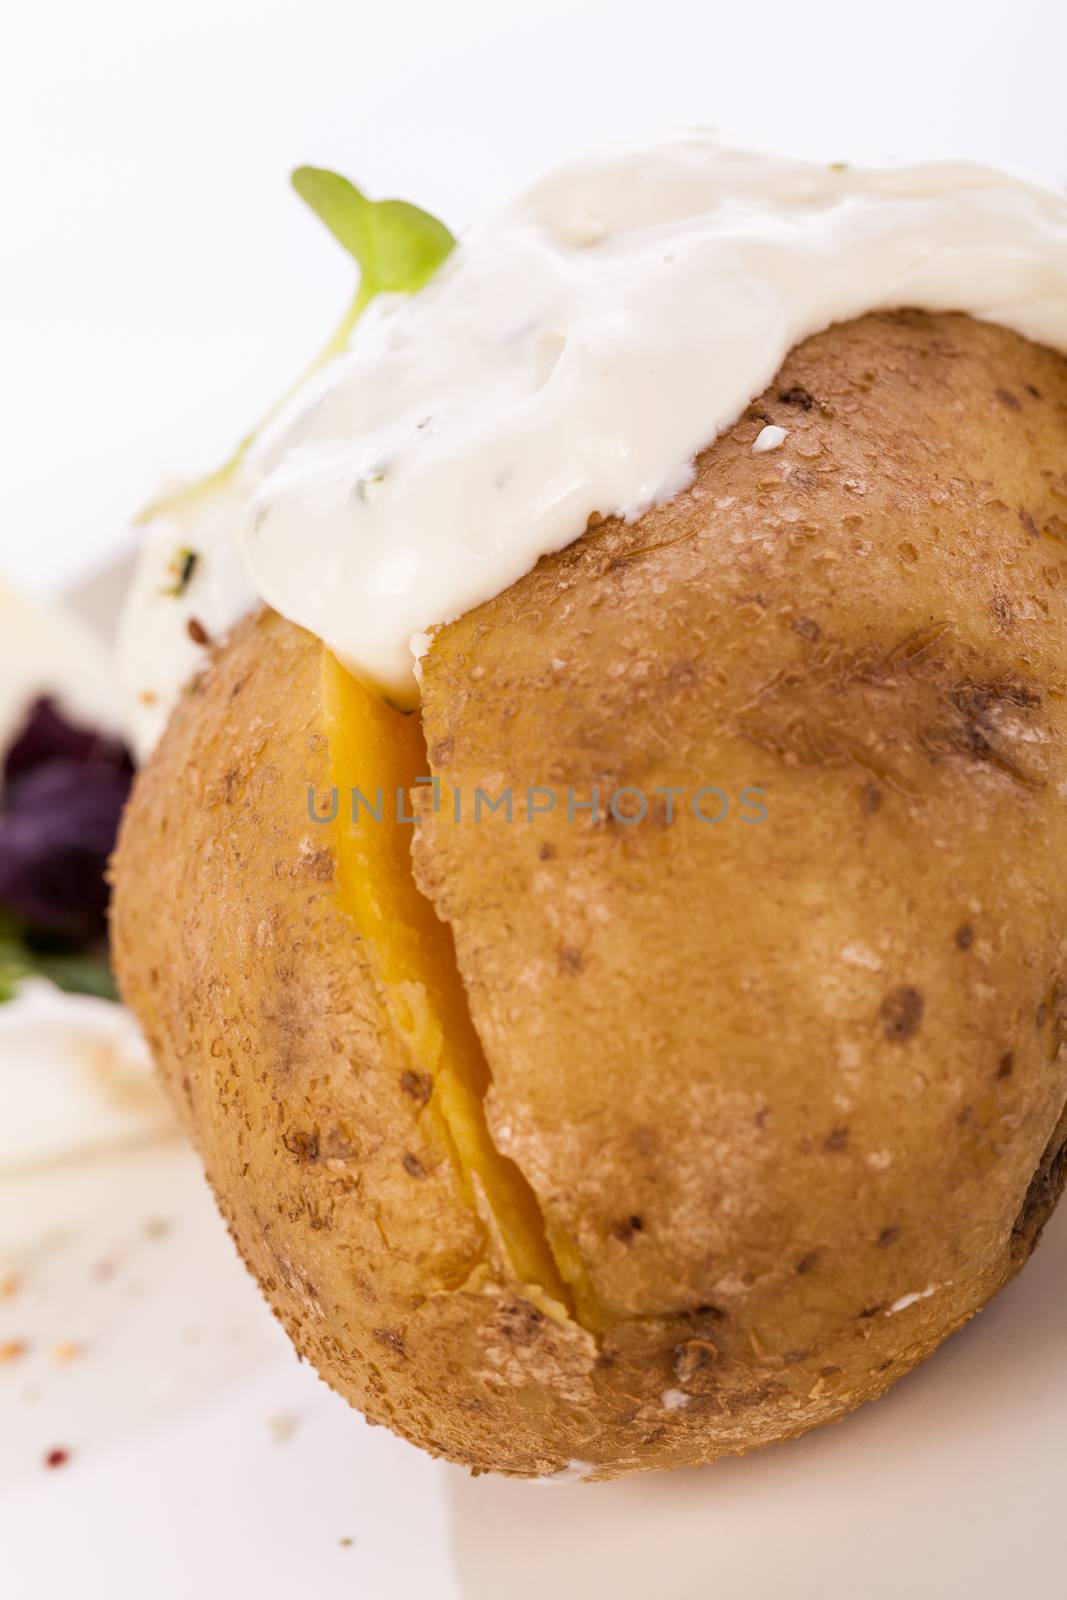 Baked jacket potato with sour cream sauce by juniart